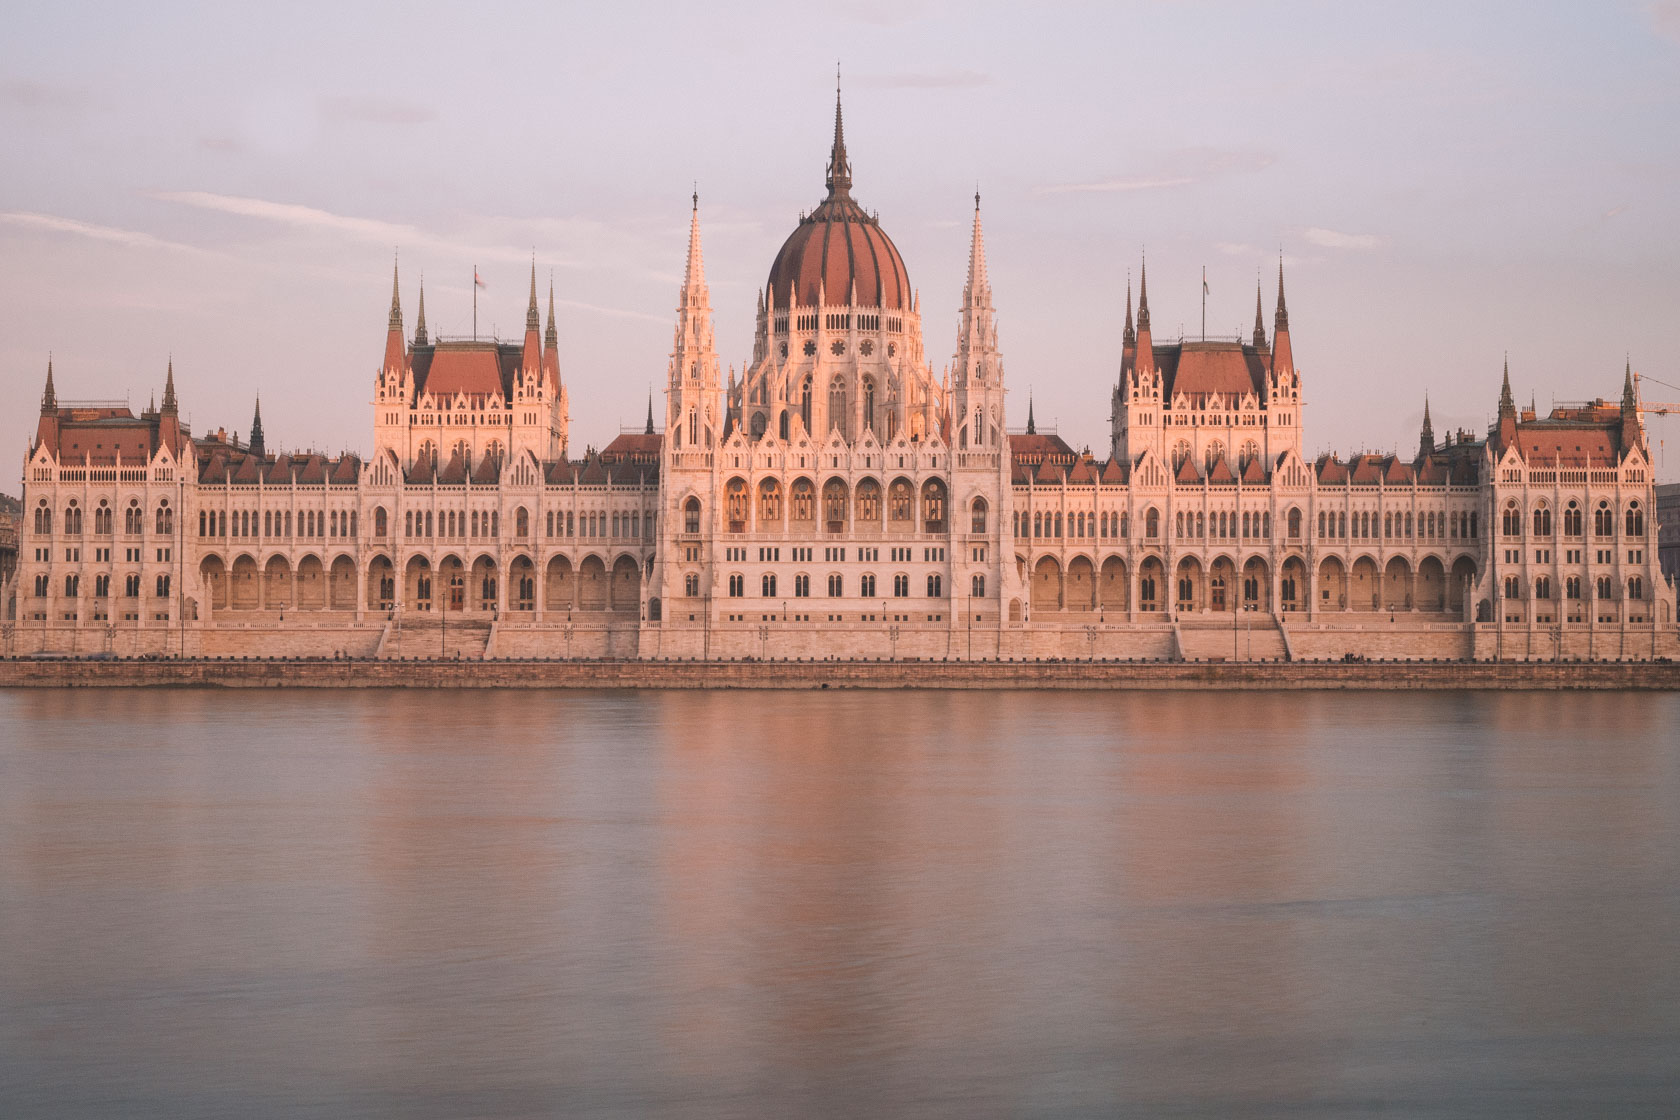 Long exposure of the Parliament in Budapest taken with a travel tripod